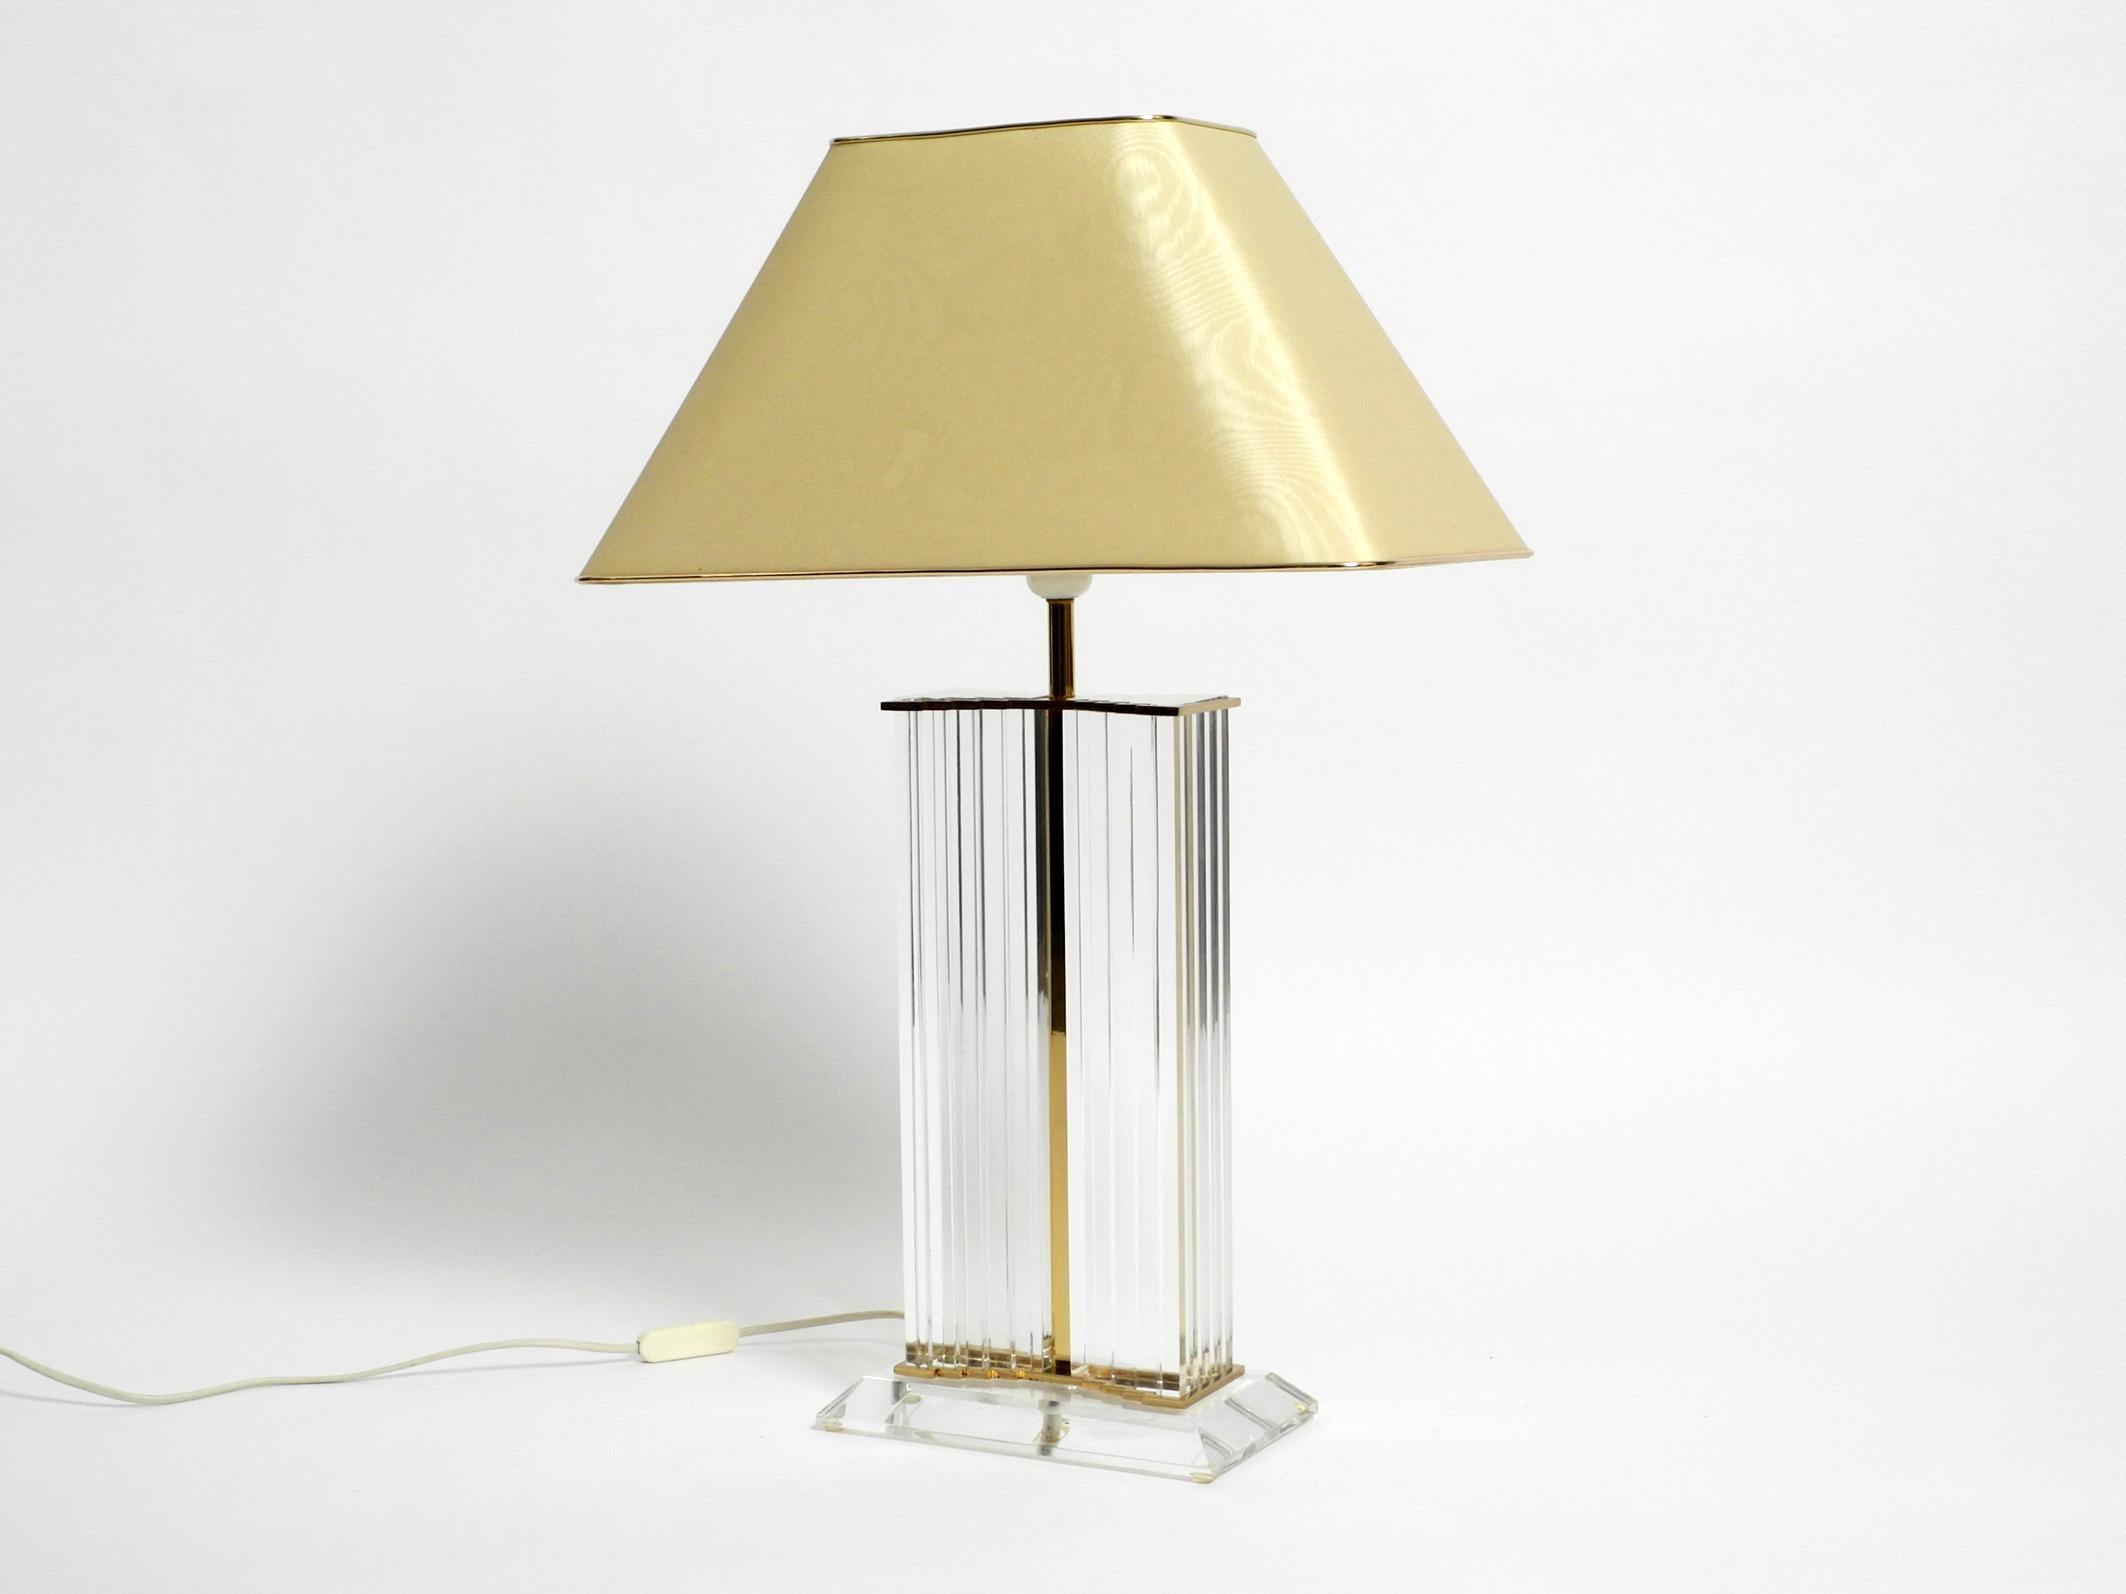 Very rare elegant large Sobremesa plexiglass table lamp from the 1980s with silk shade.
Great high quality 1980s design. Most likely from an italian production.
Thick plexiglass frame and foot with brass rod and beautiful original silk